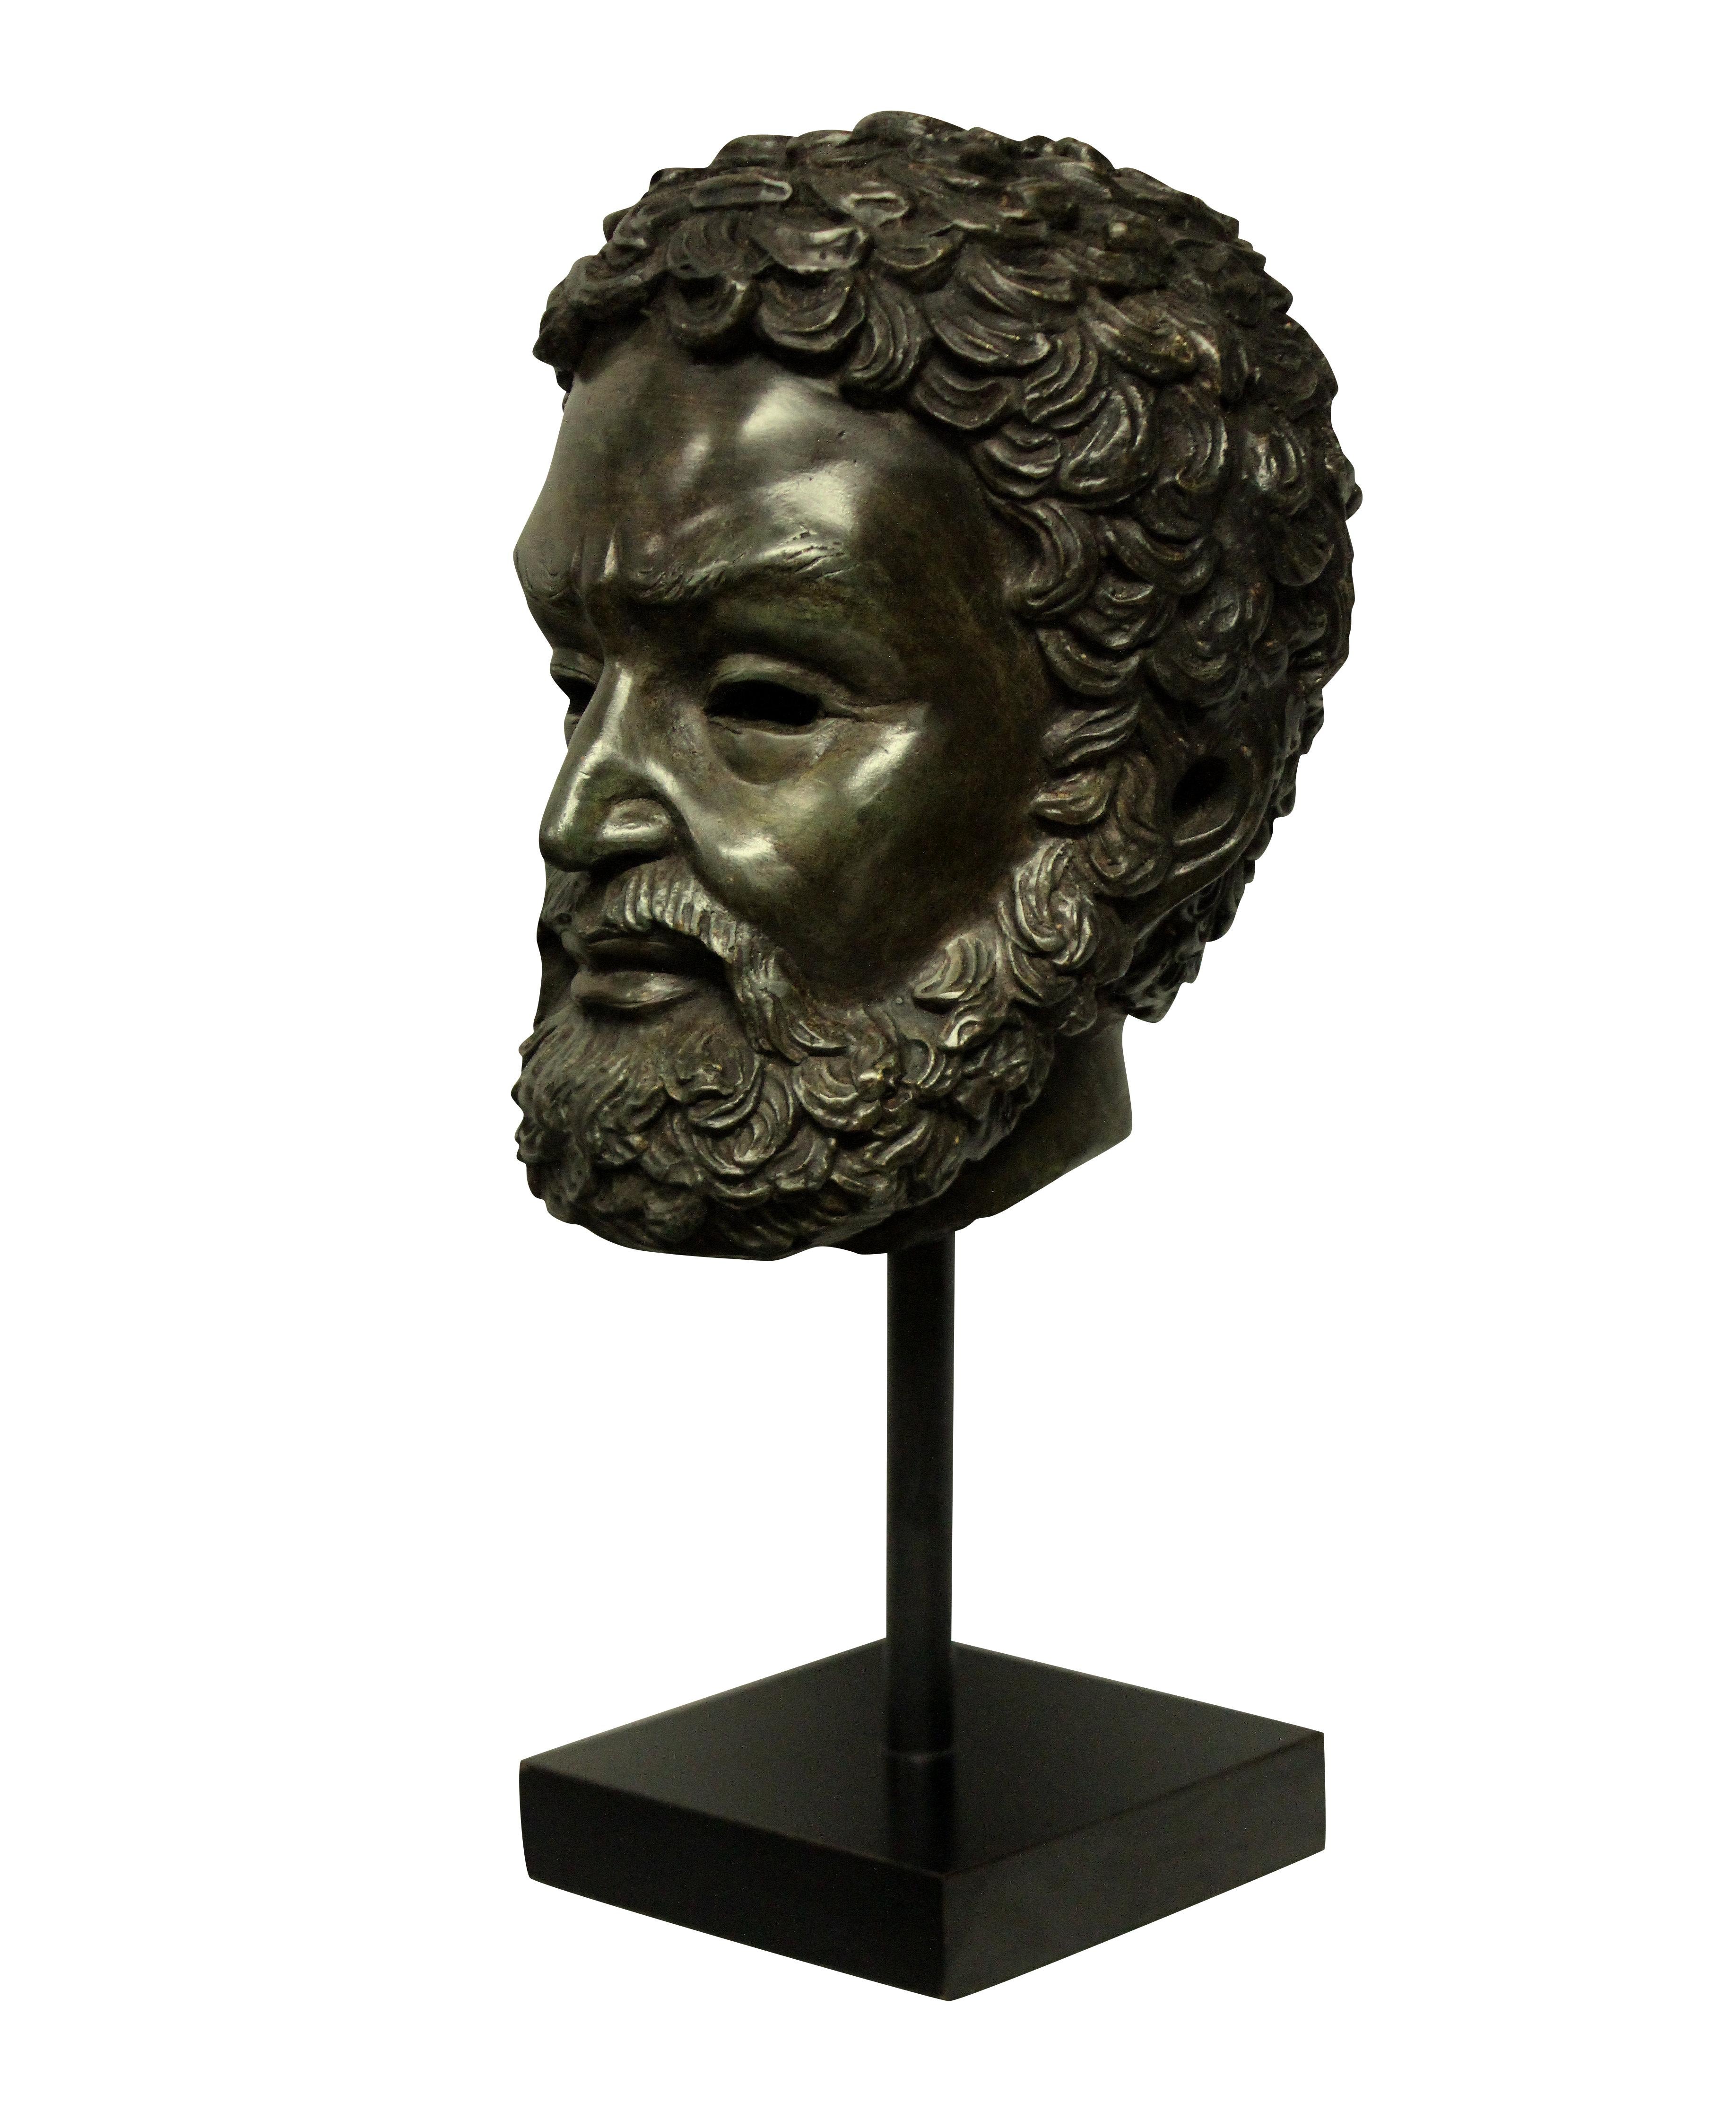 An English bronze head of Zeus, mounted on an ebonised stand.